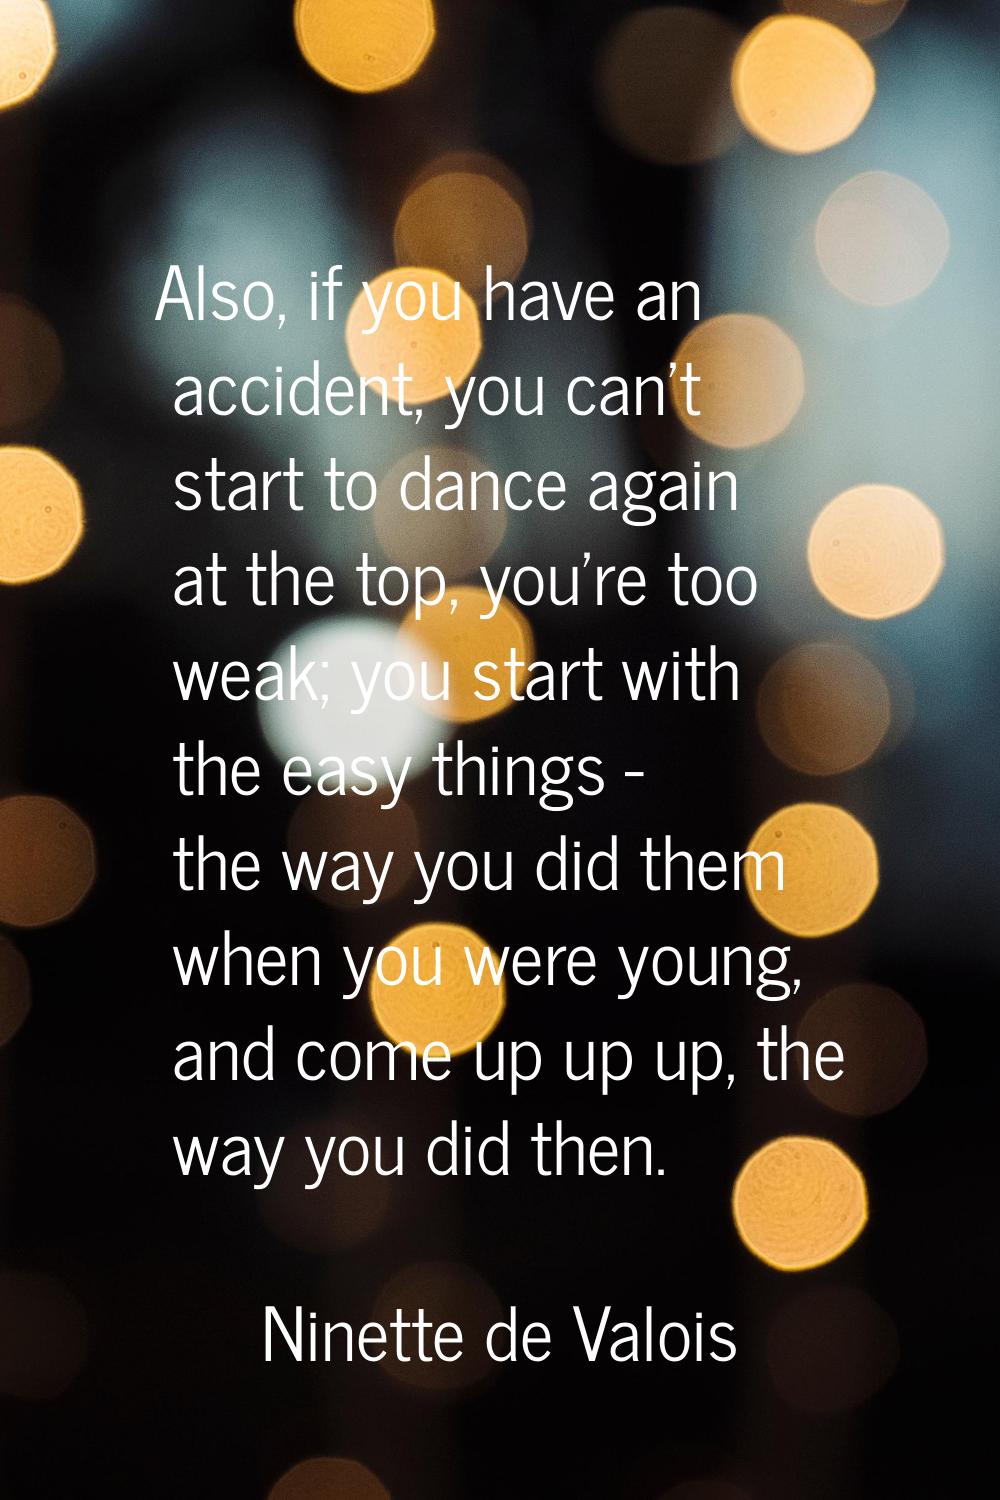 Also, if you have an accident, you can't start to dance again at the top, you're too weak; you star